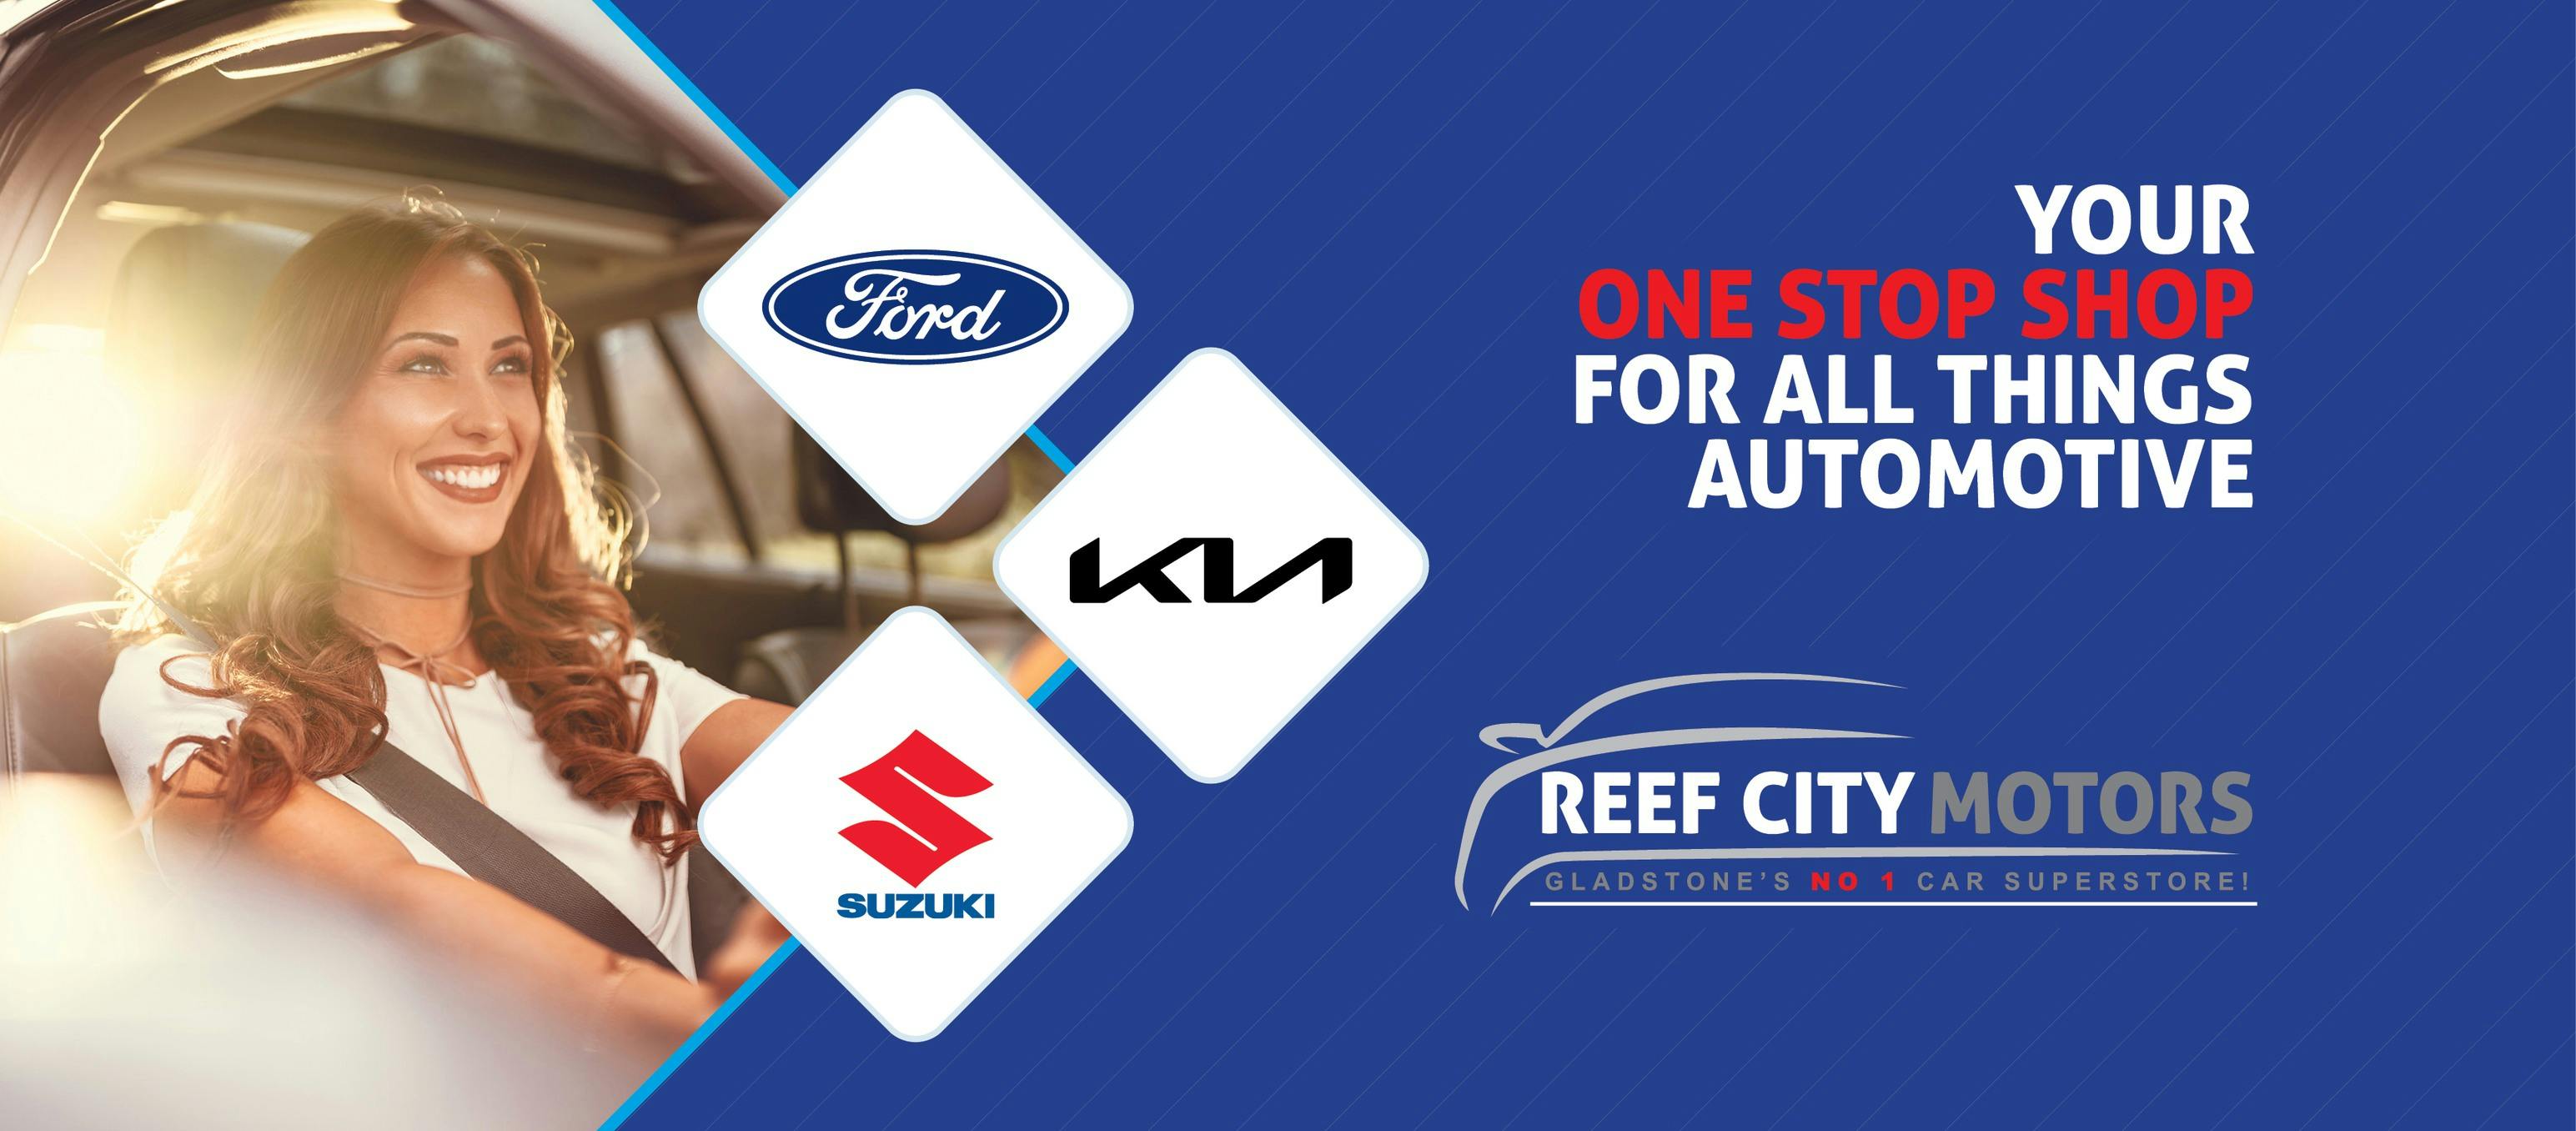 Reef City Motors About Us Banner